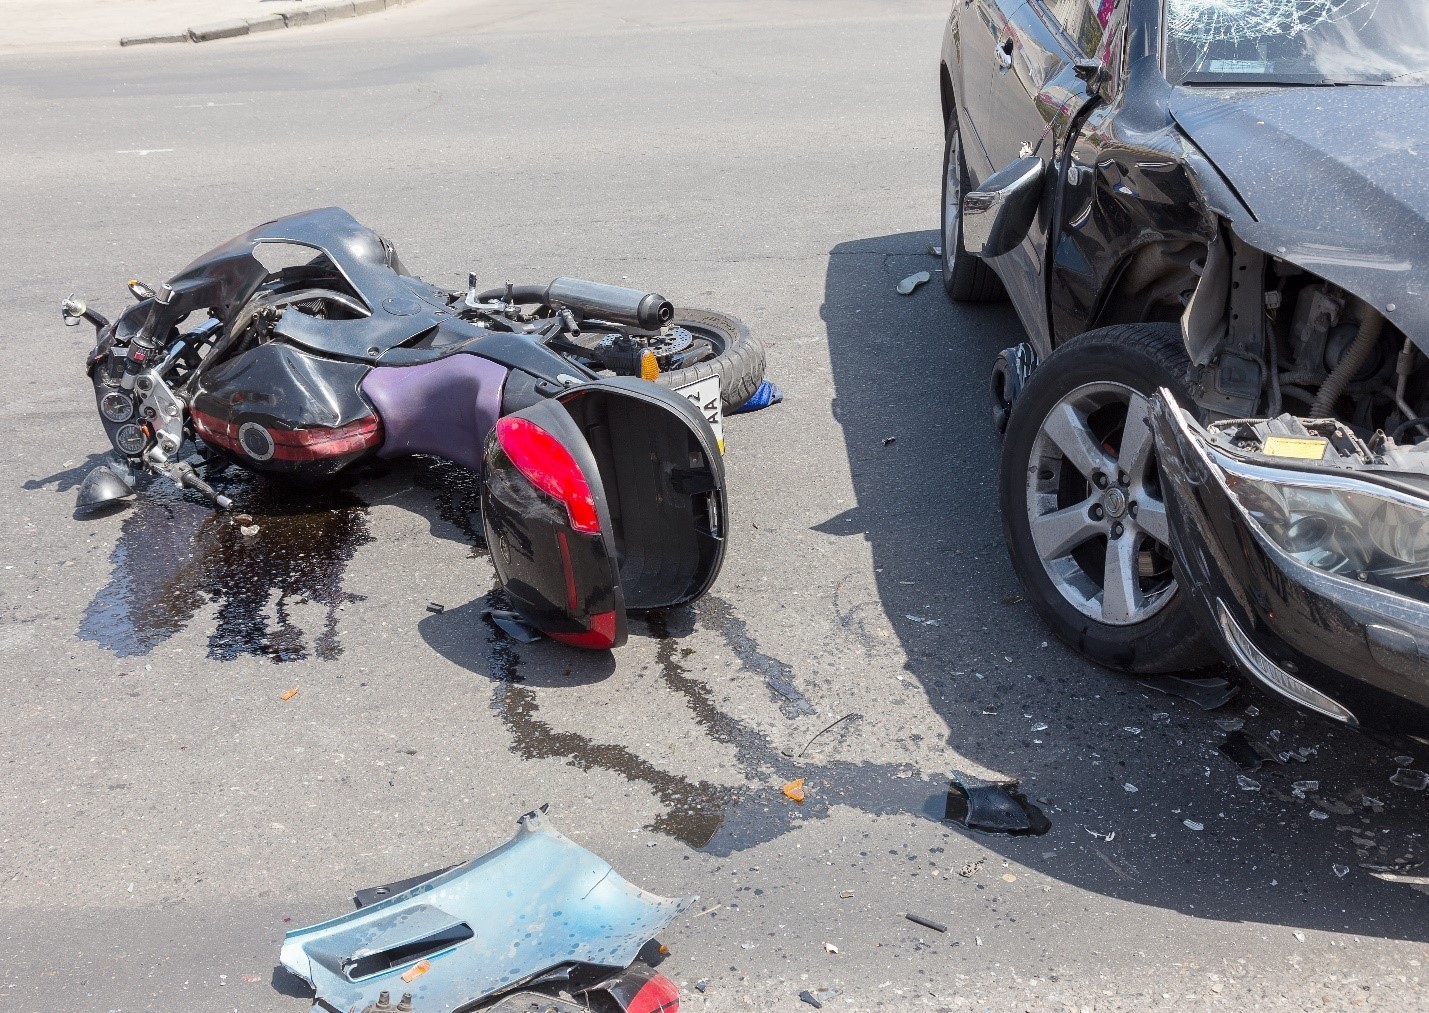 Motorcycle Insurance – What’s Covered? What Issues Arise? Why Do I Need It?